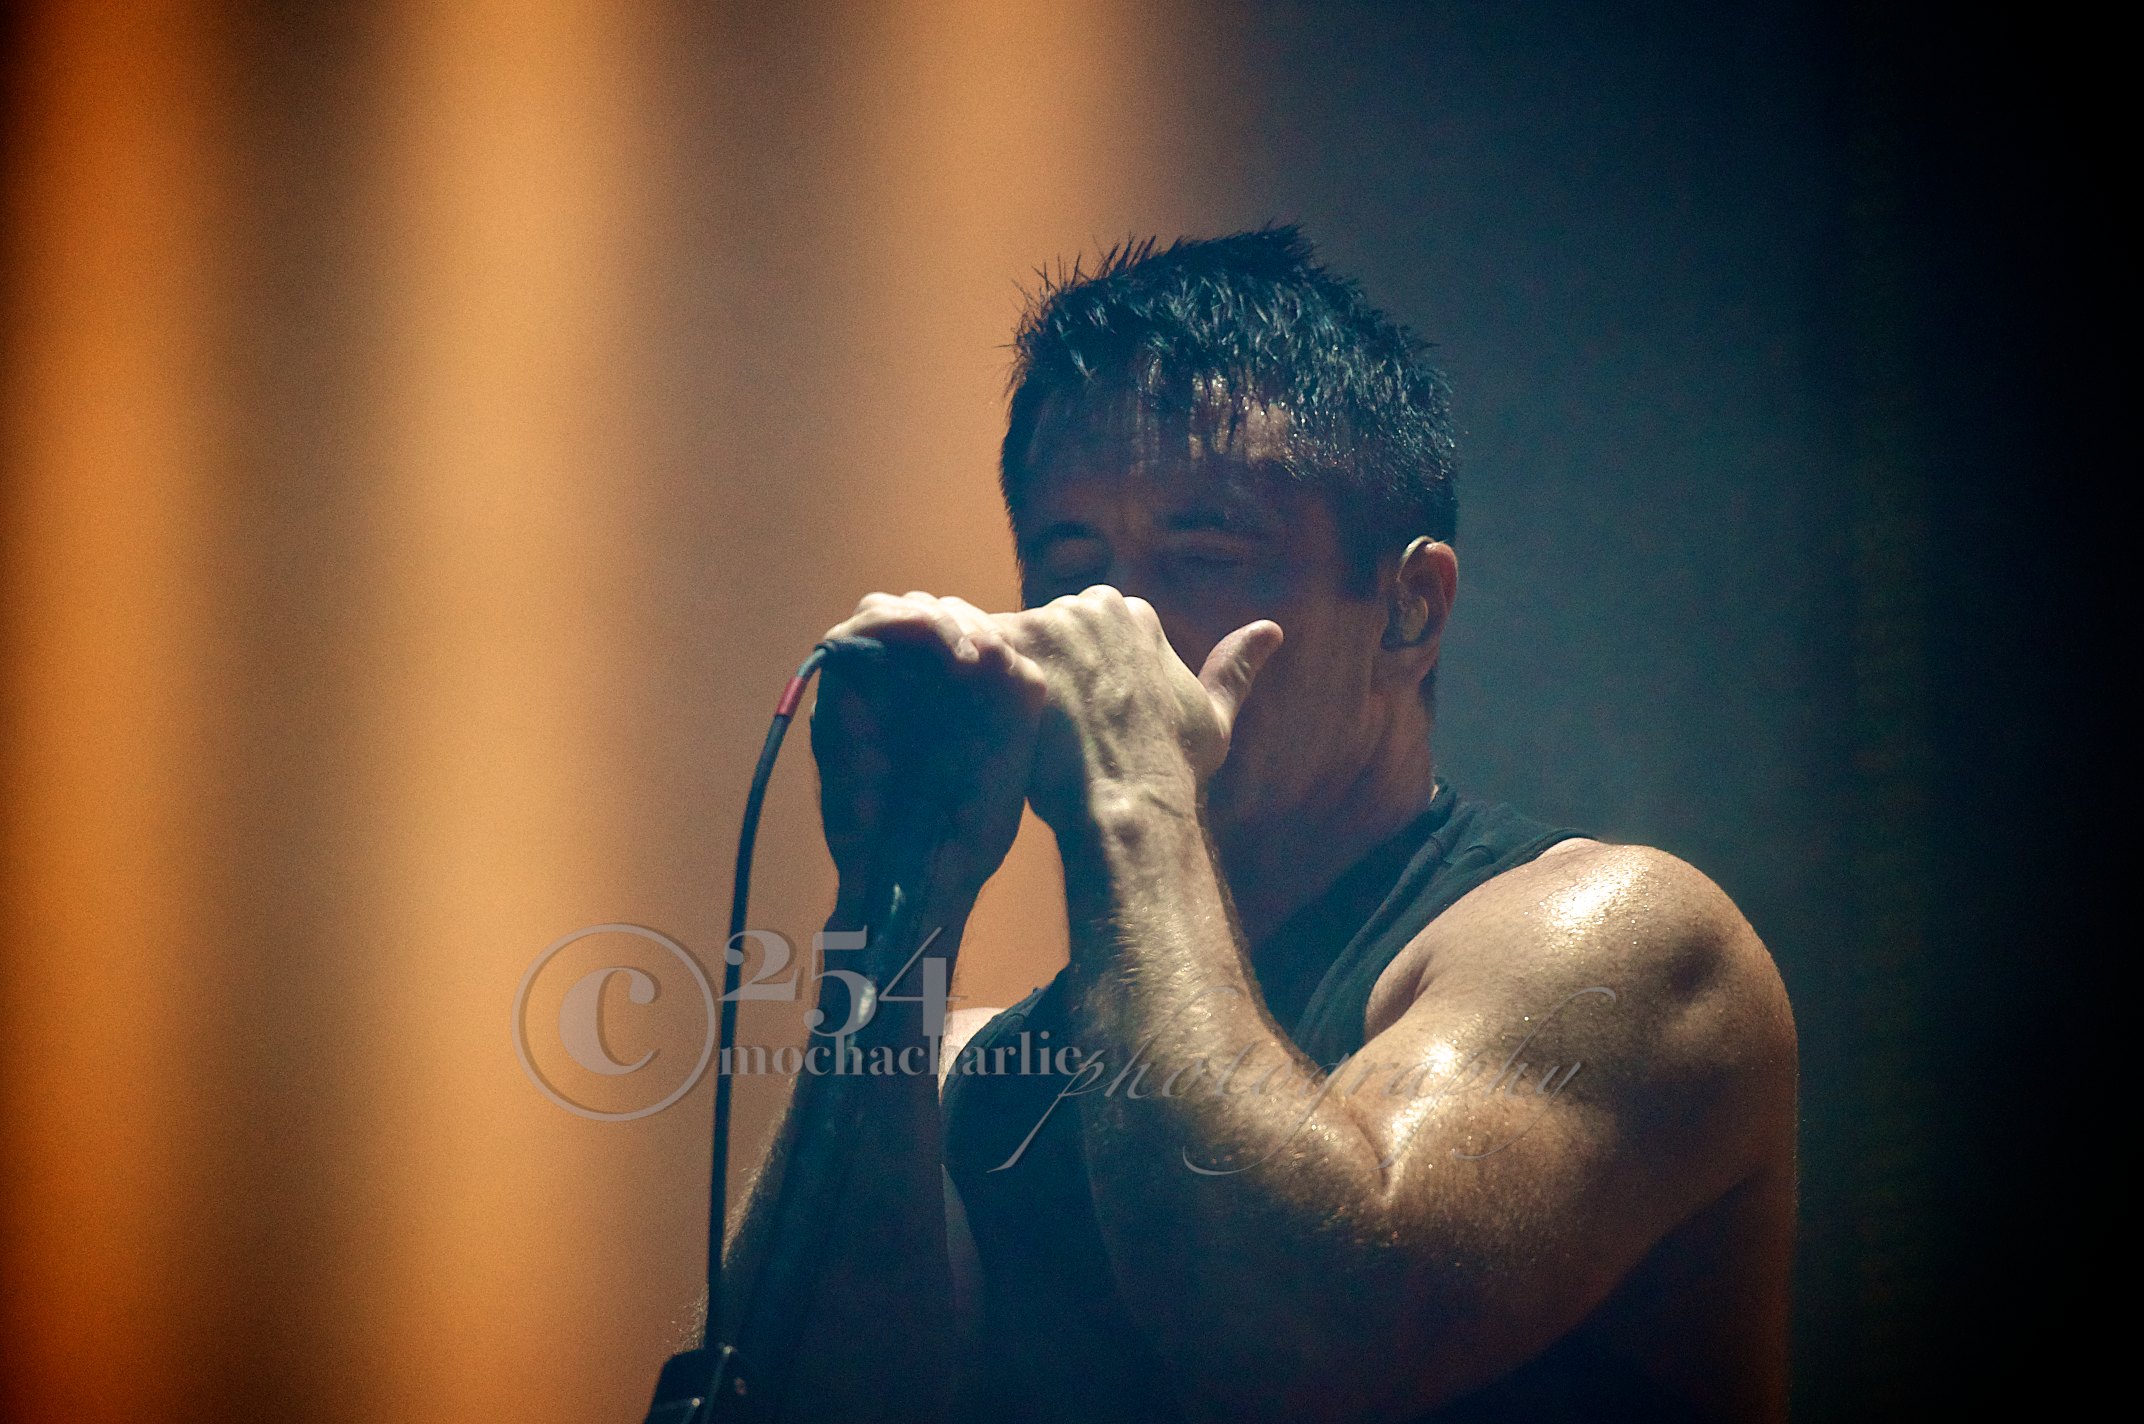 Nine Inch Nails at White River Ampitheatre (Photo by Mocha Charlie)